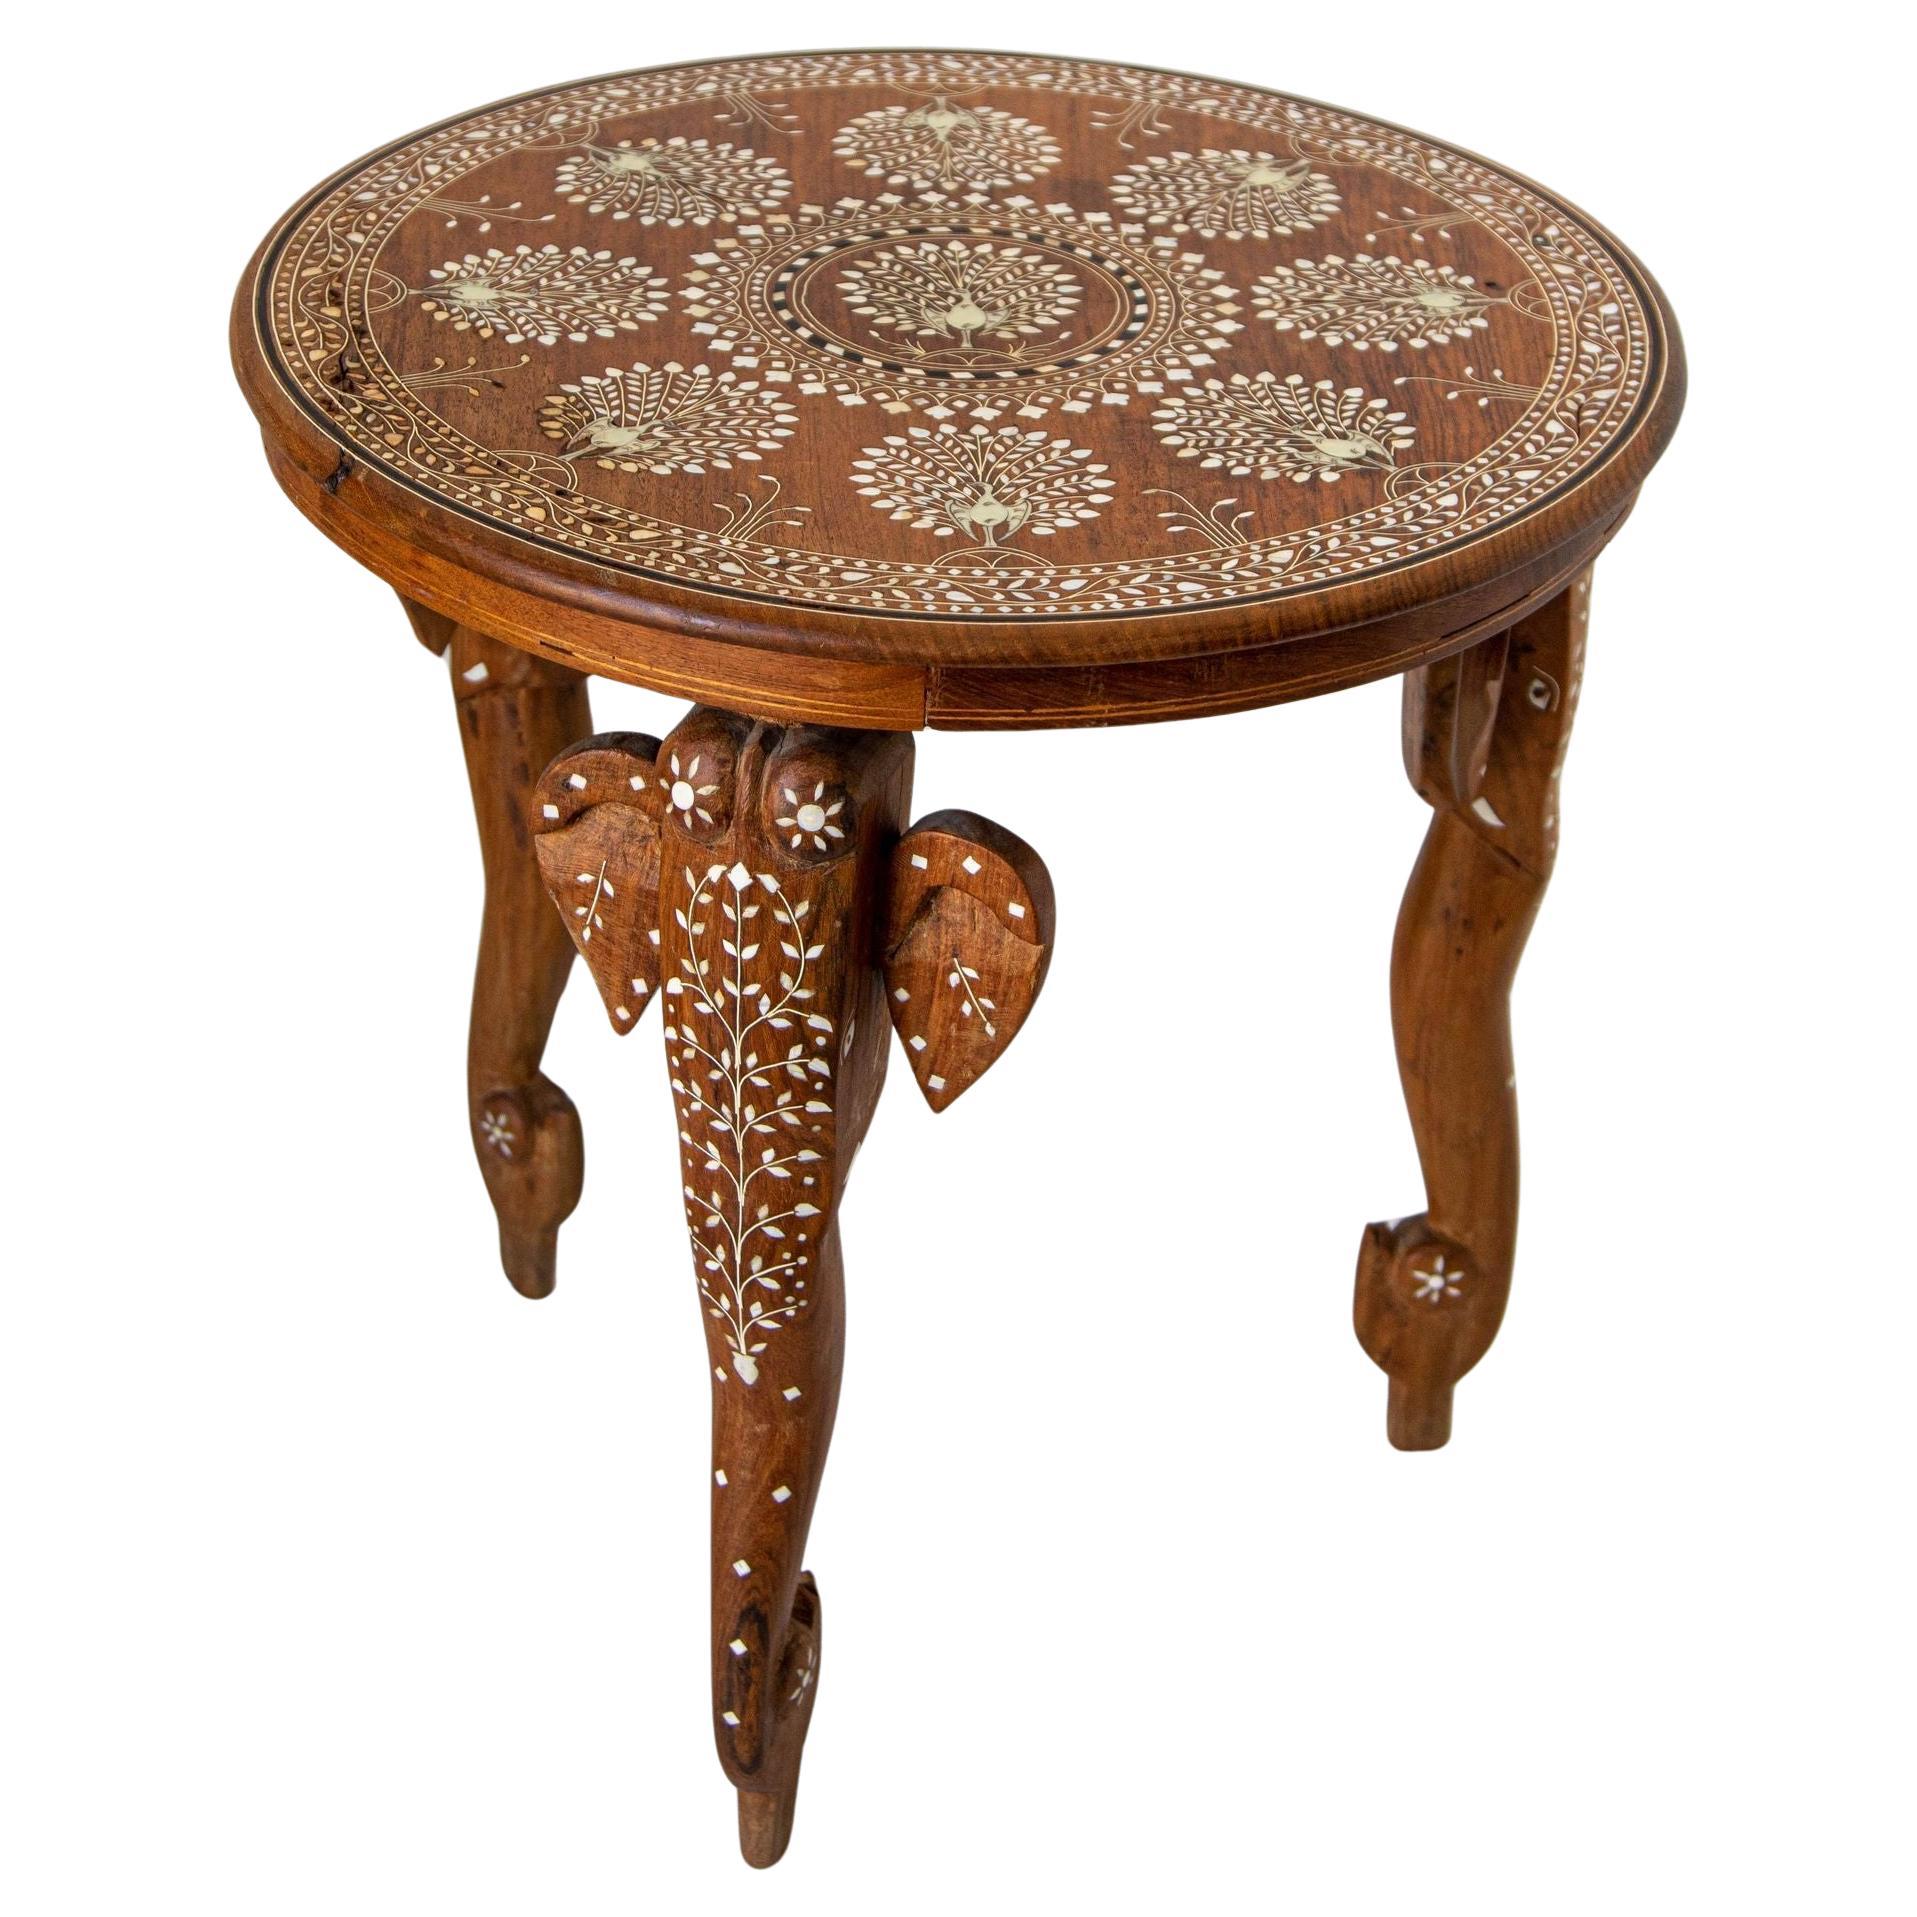 Anglo Indian Mughal Teak Inlaid Round Side Table